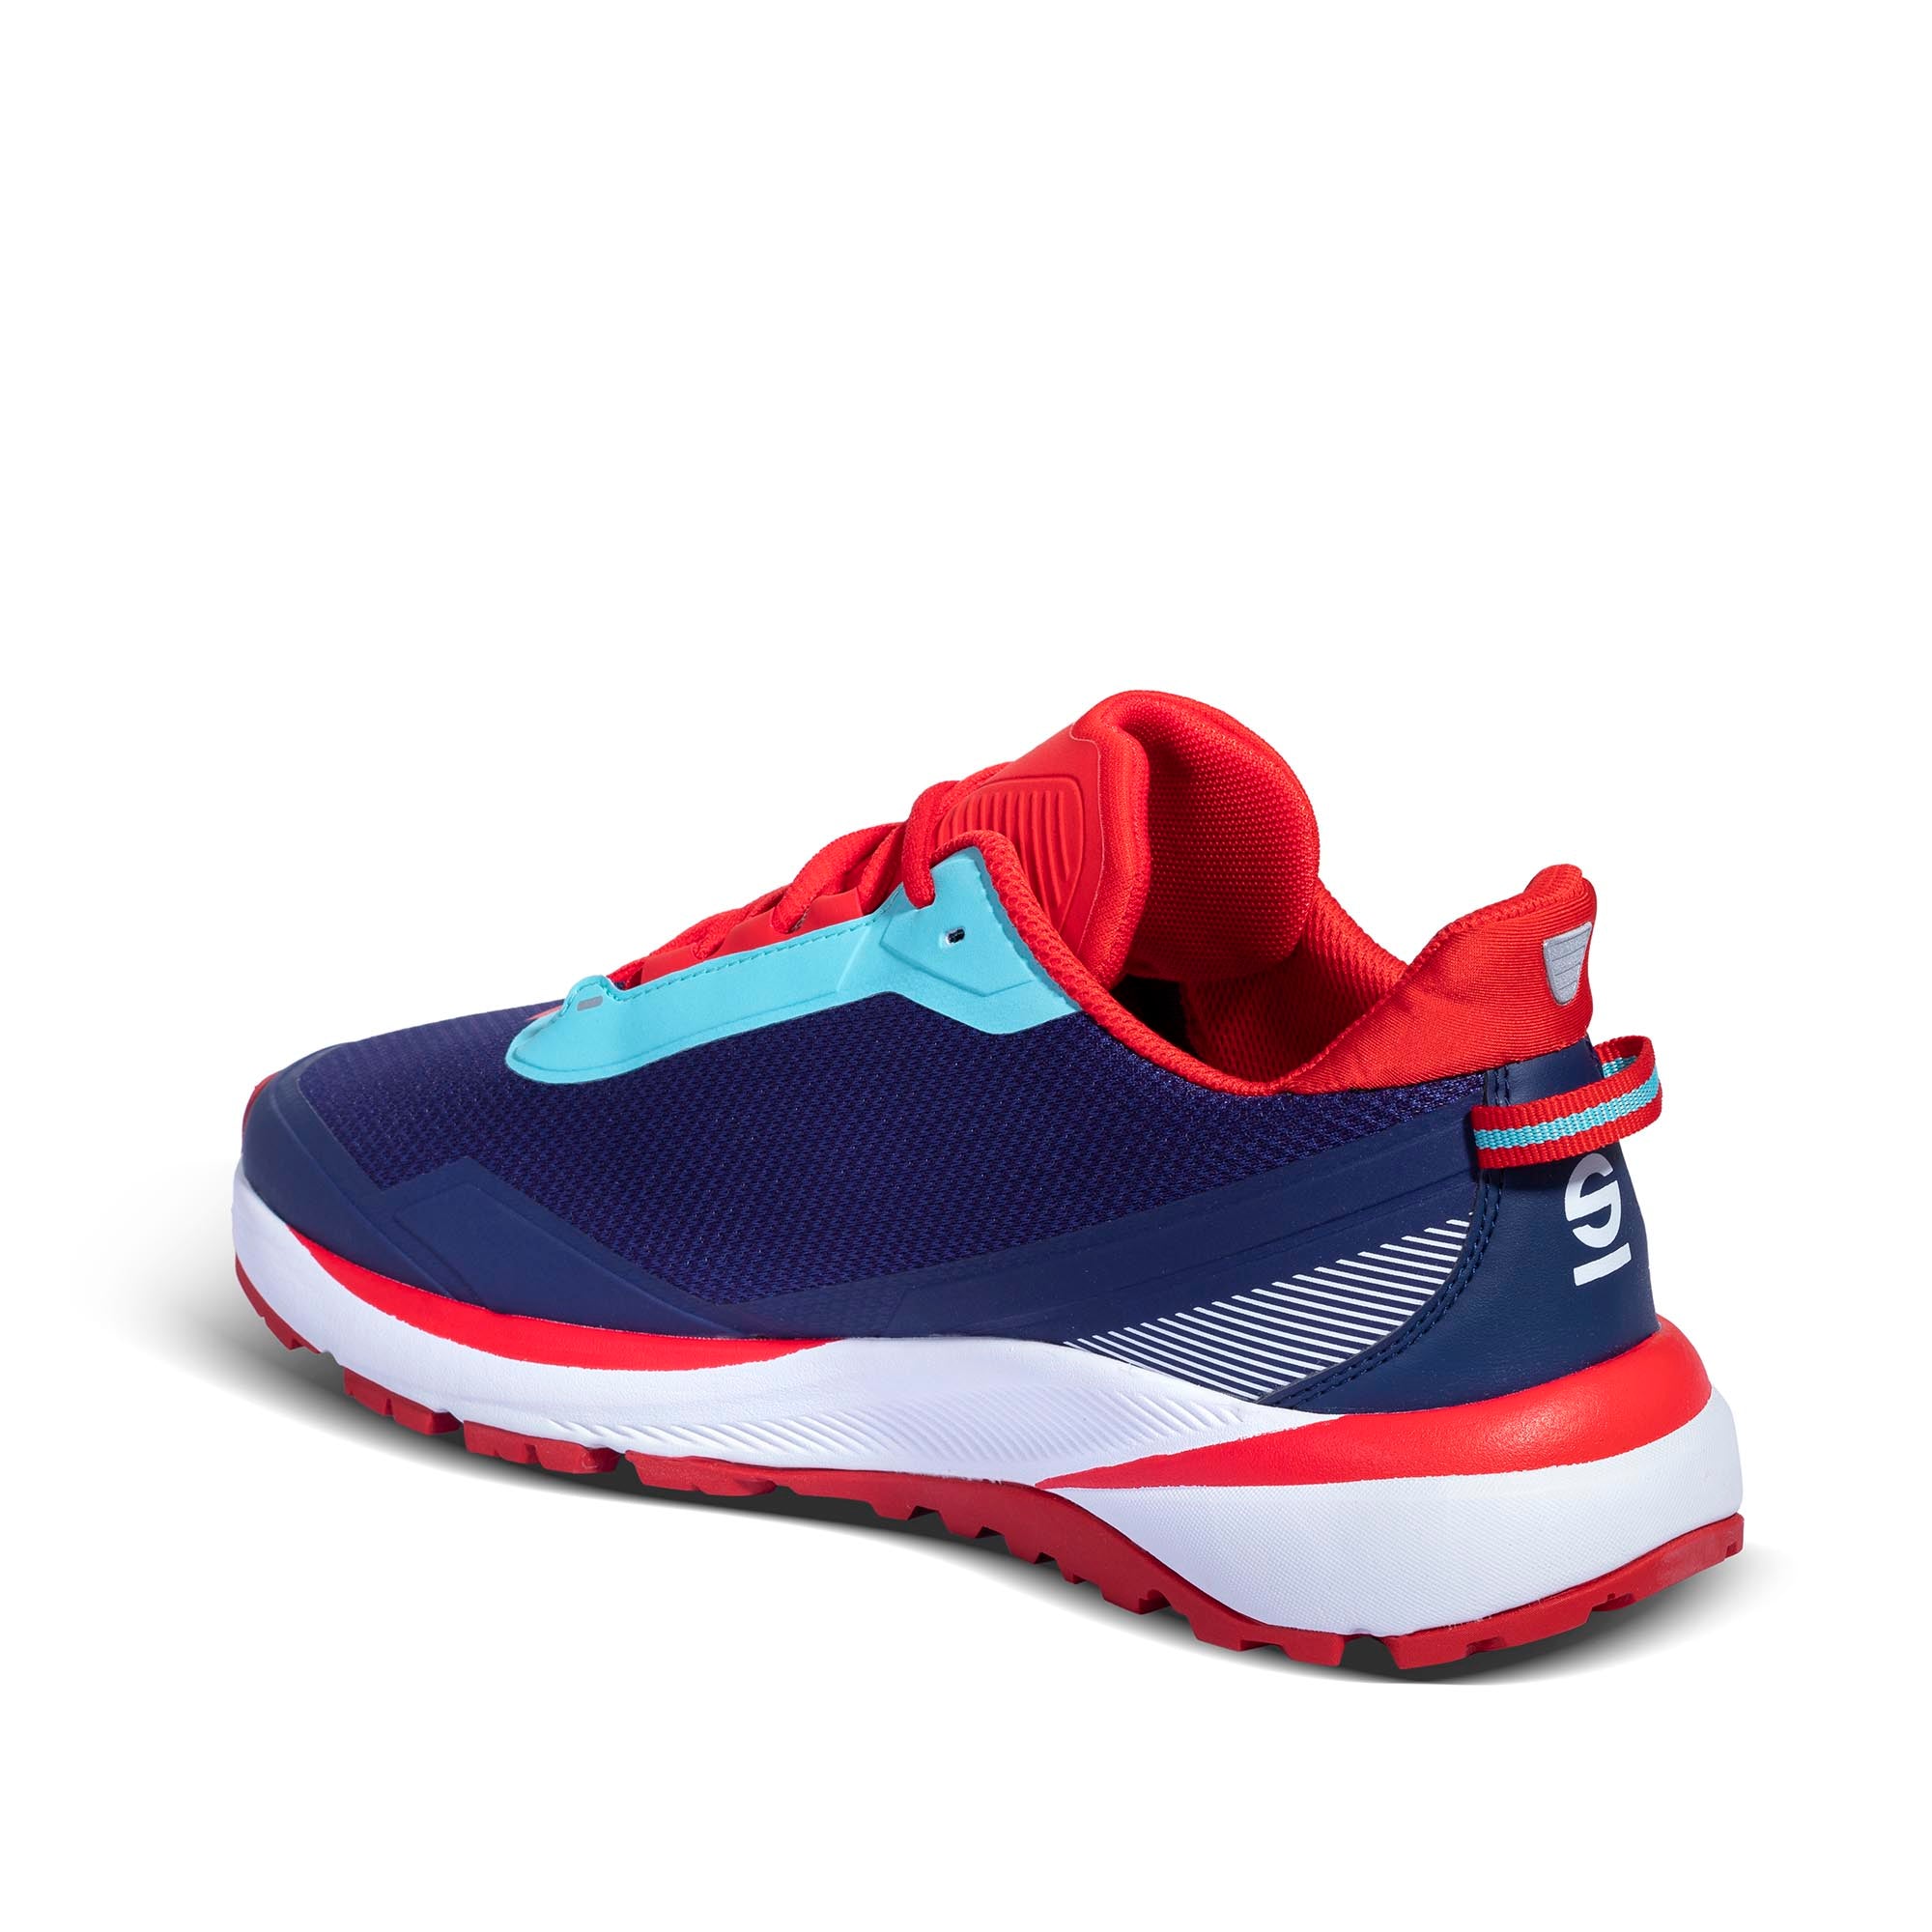 Sparco Martini S-Run Shoes